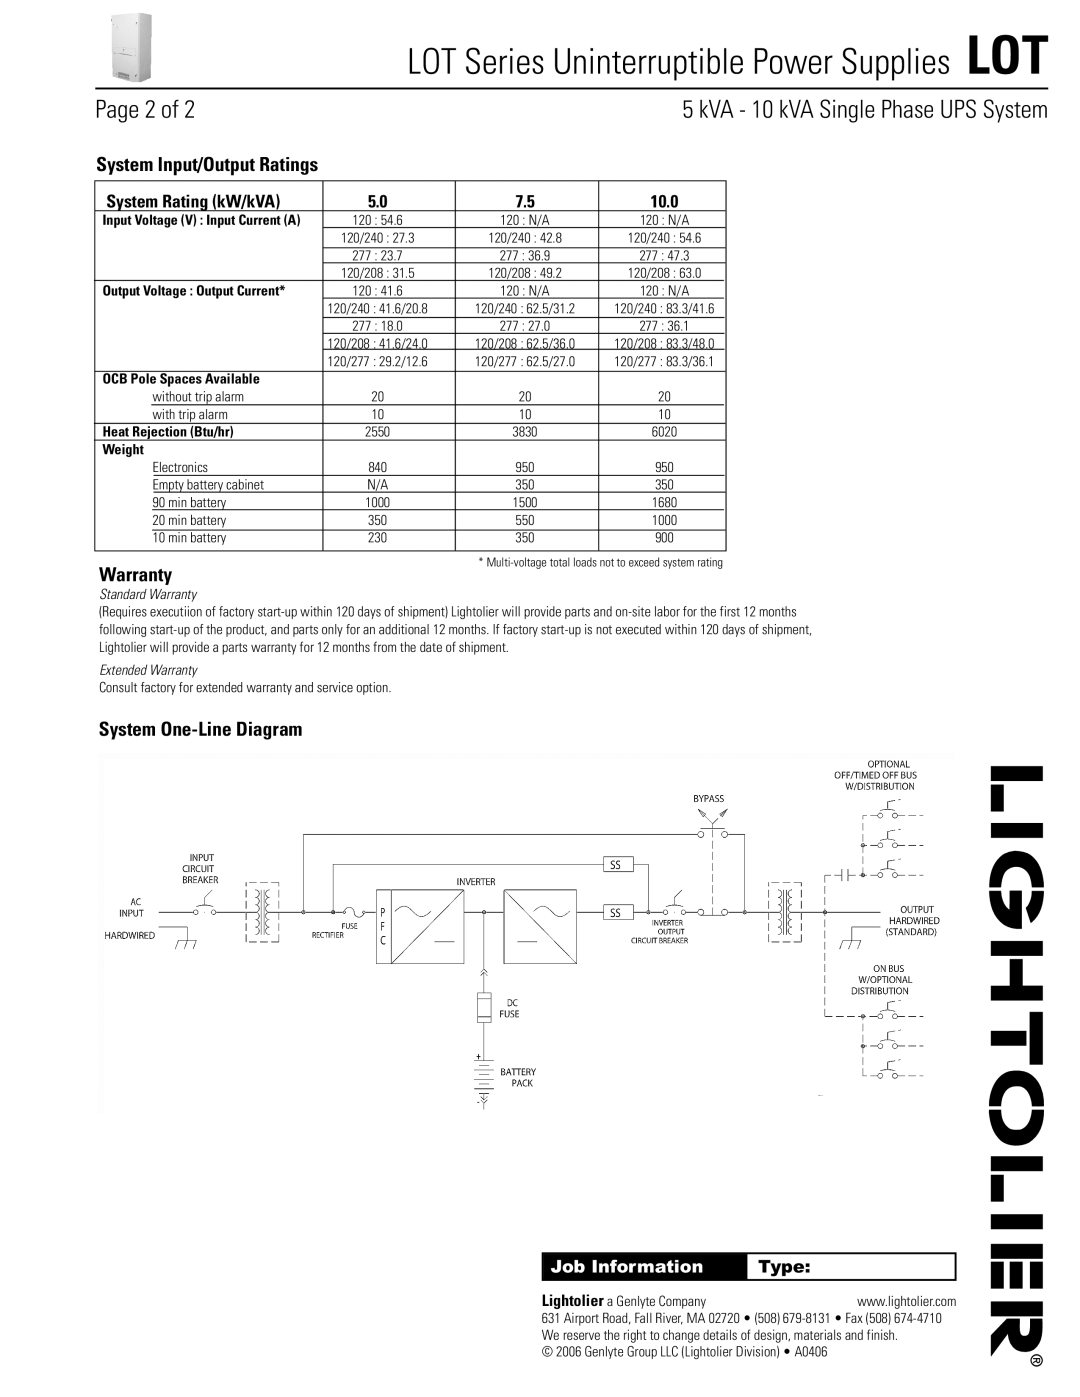 Lightolier LOT Series Page 2 of, Warranty, System One-Line Diagram, OCB Pole Spaces Available, Heat Rejection Btu/hr, Type 